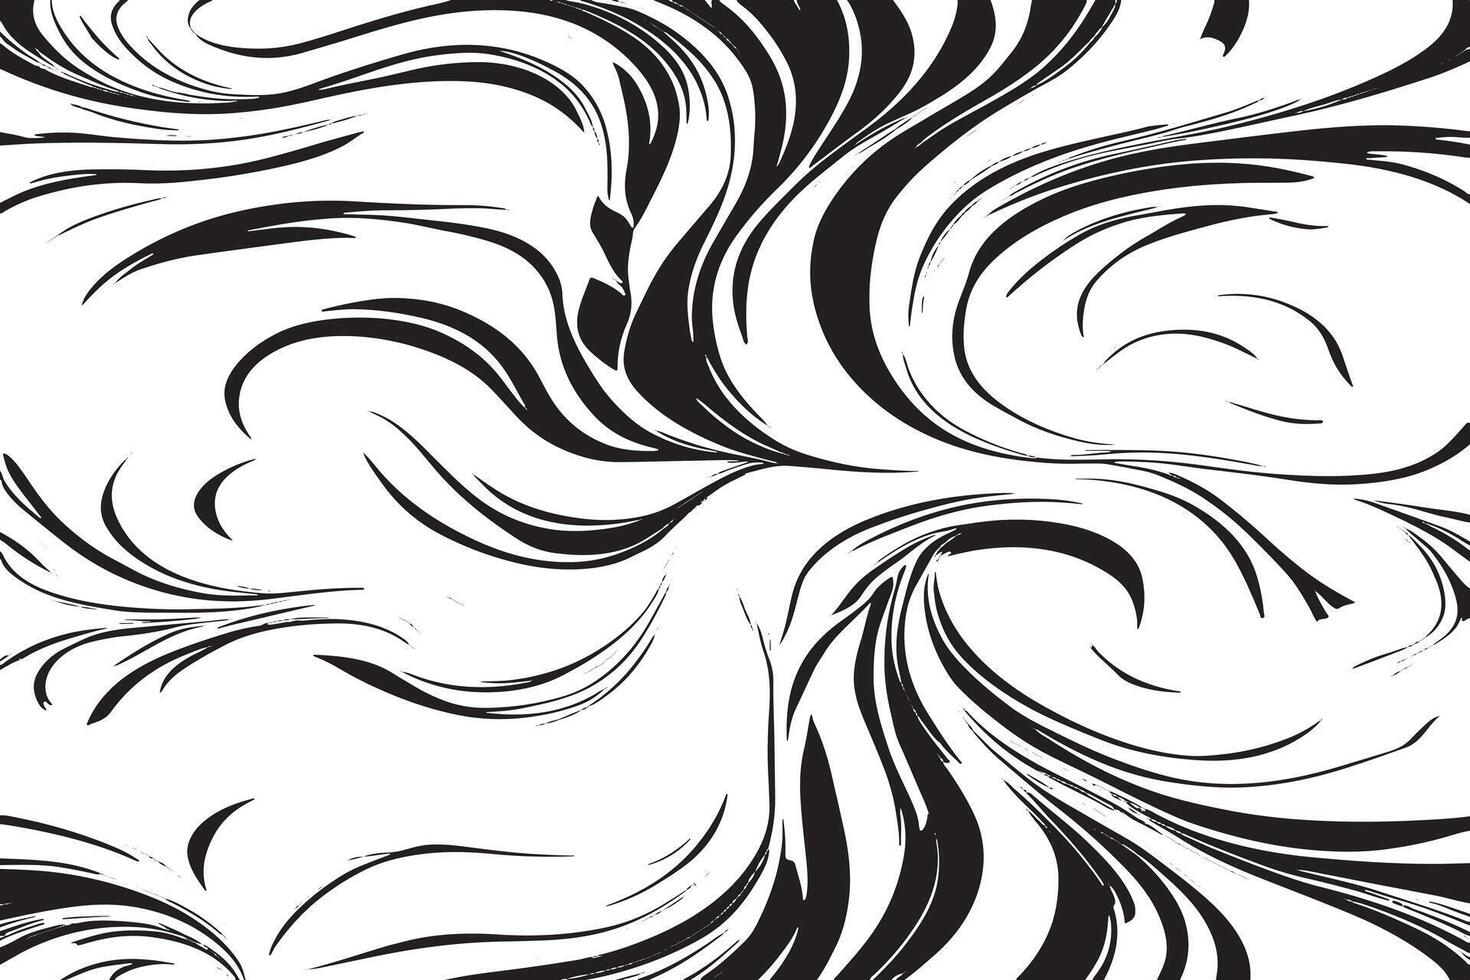 Abstract Black and White overlay monochrome Swirl Pattern Background Texture vector